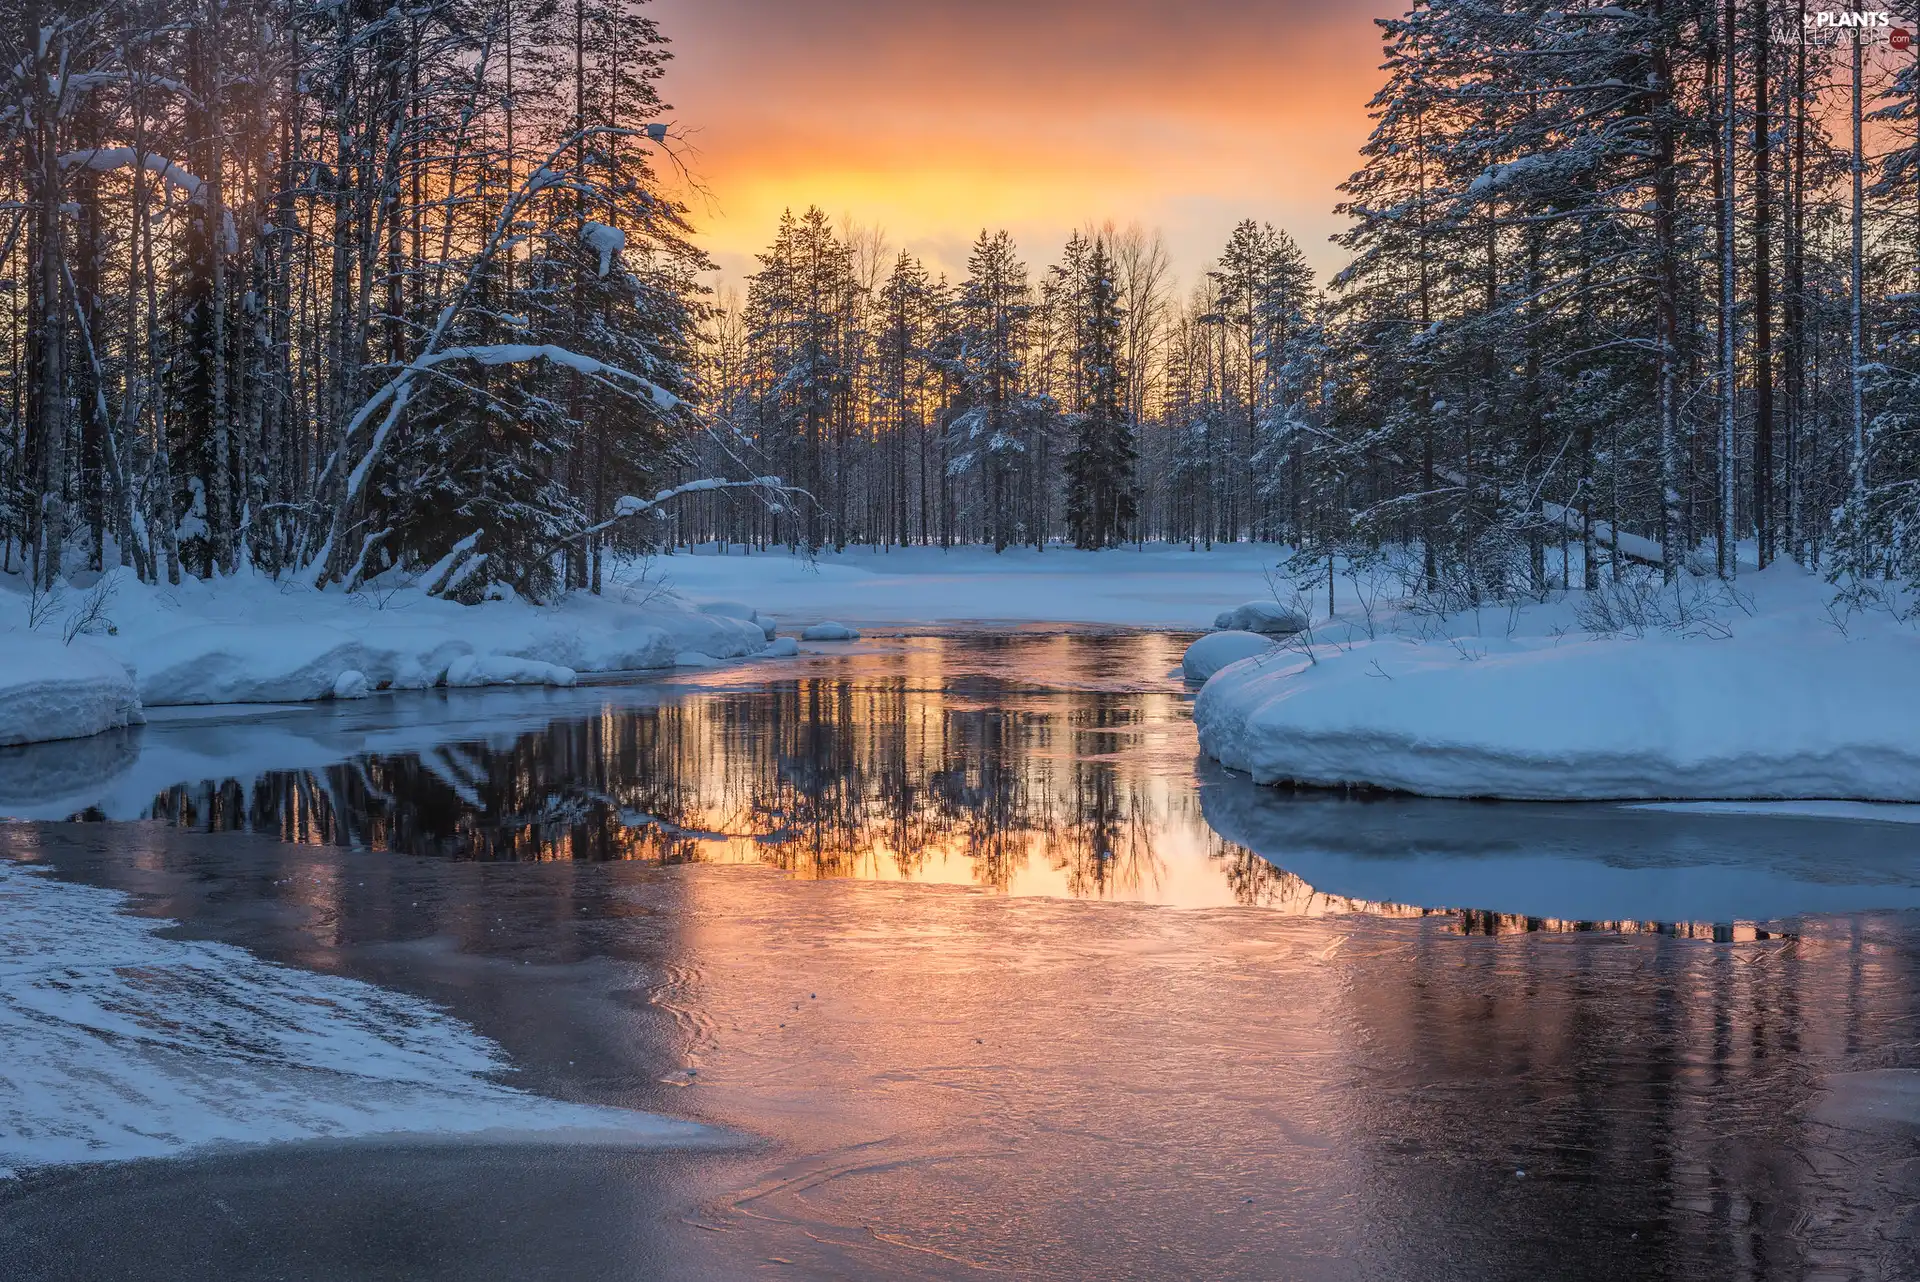 Icecream, trees, Great Sunsets, viewes, snow, River, winter, forest